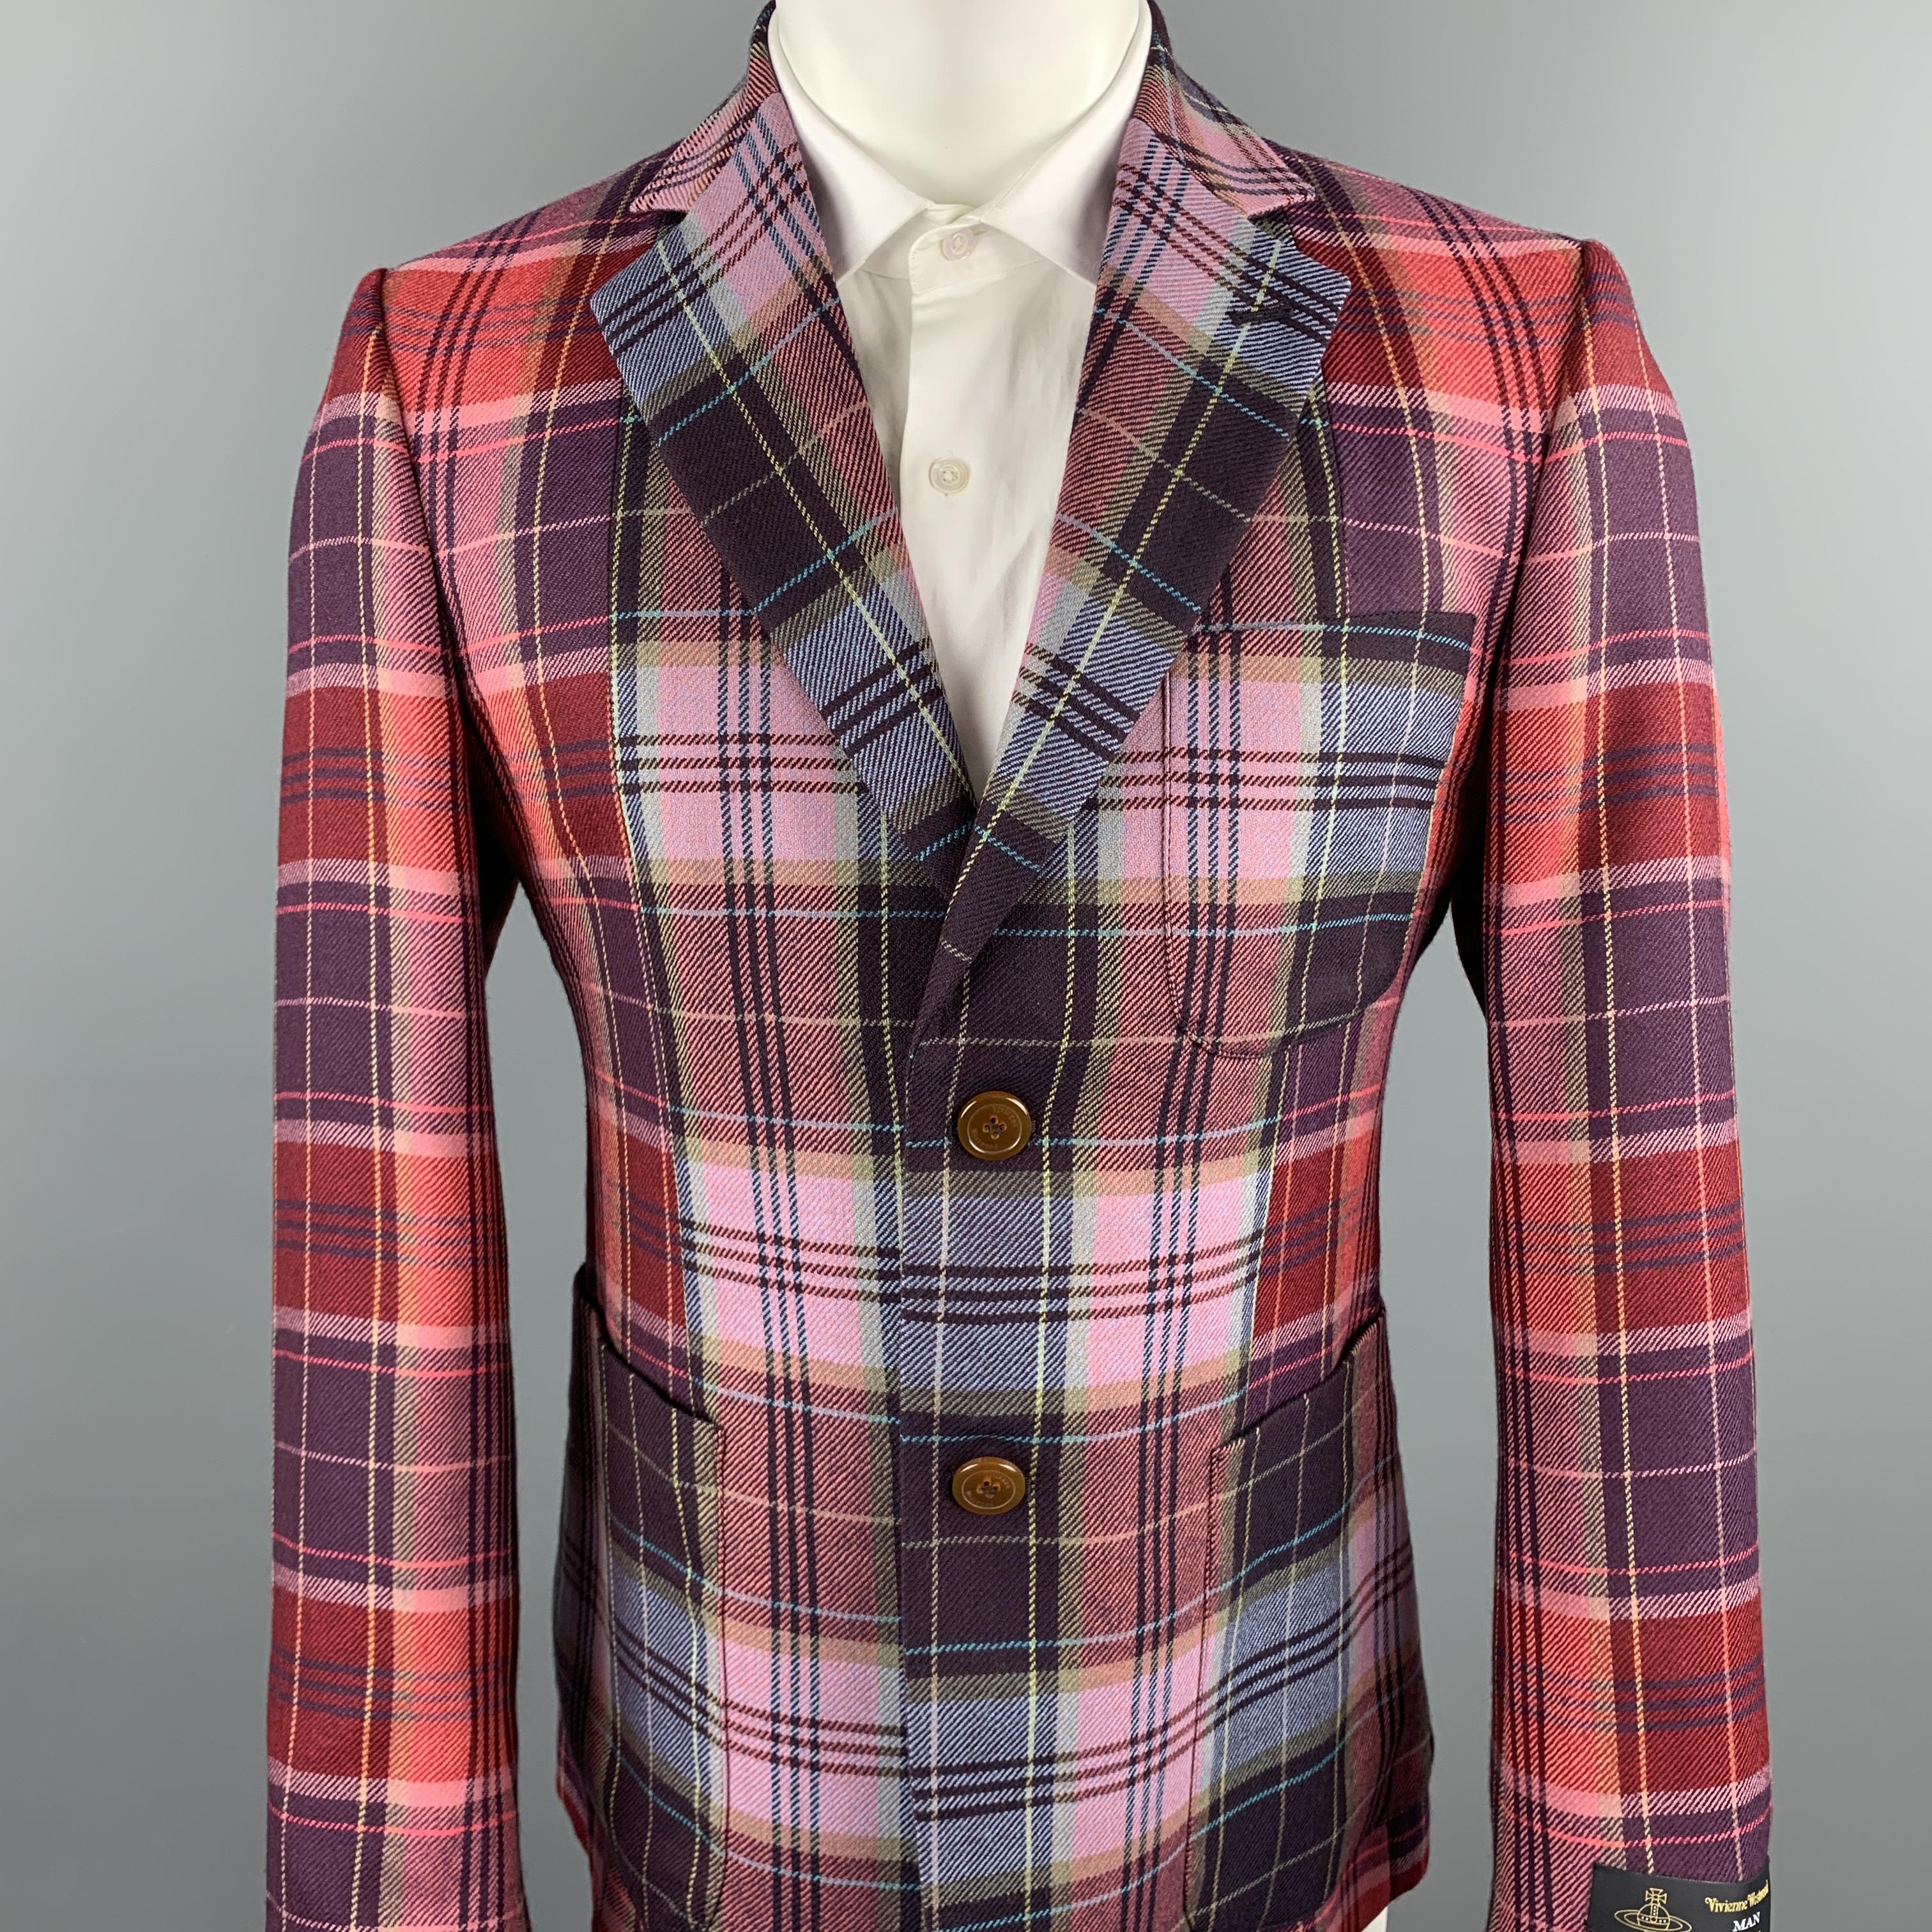 VIVIENNE WESTWOOD MAN sport coat comes in a multi-color plaid wool featuring a notch lapel, patch pockets, and a two button closure. Made in Italy.
Retail Price- $1600
Excellent Pre-Owned Condition.
Marked: IT 50

Measurements:

Shoulder: 17.5 in.